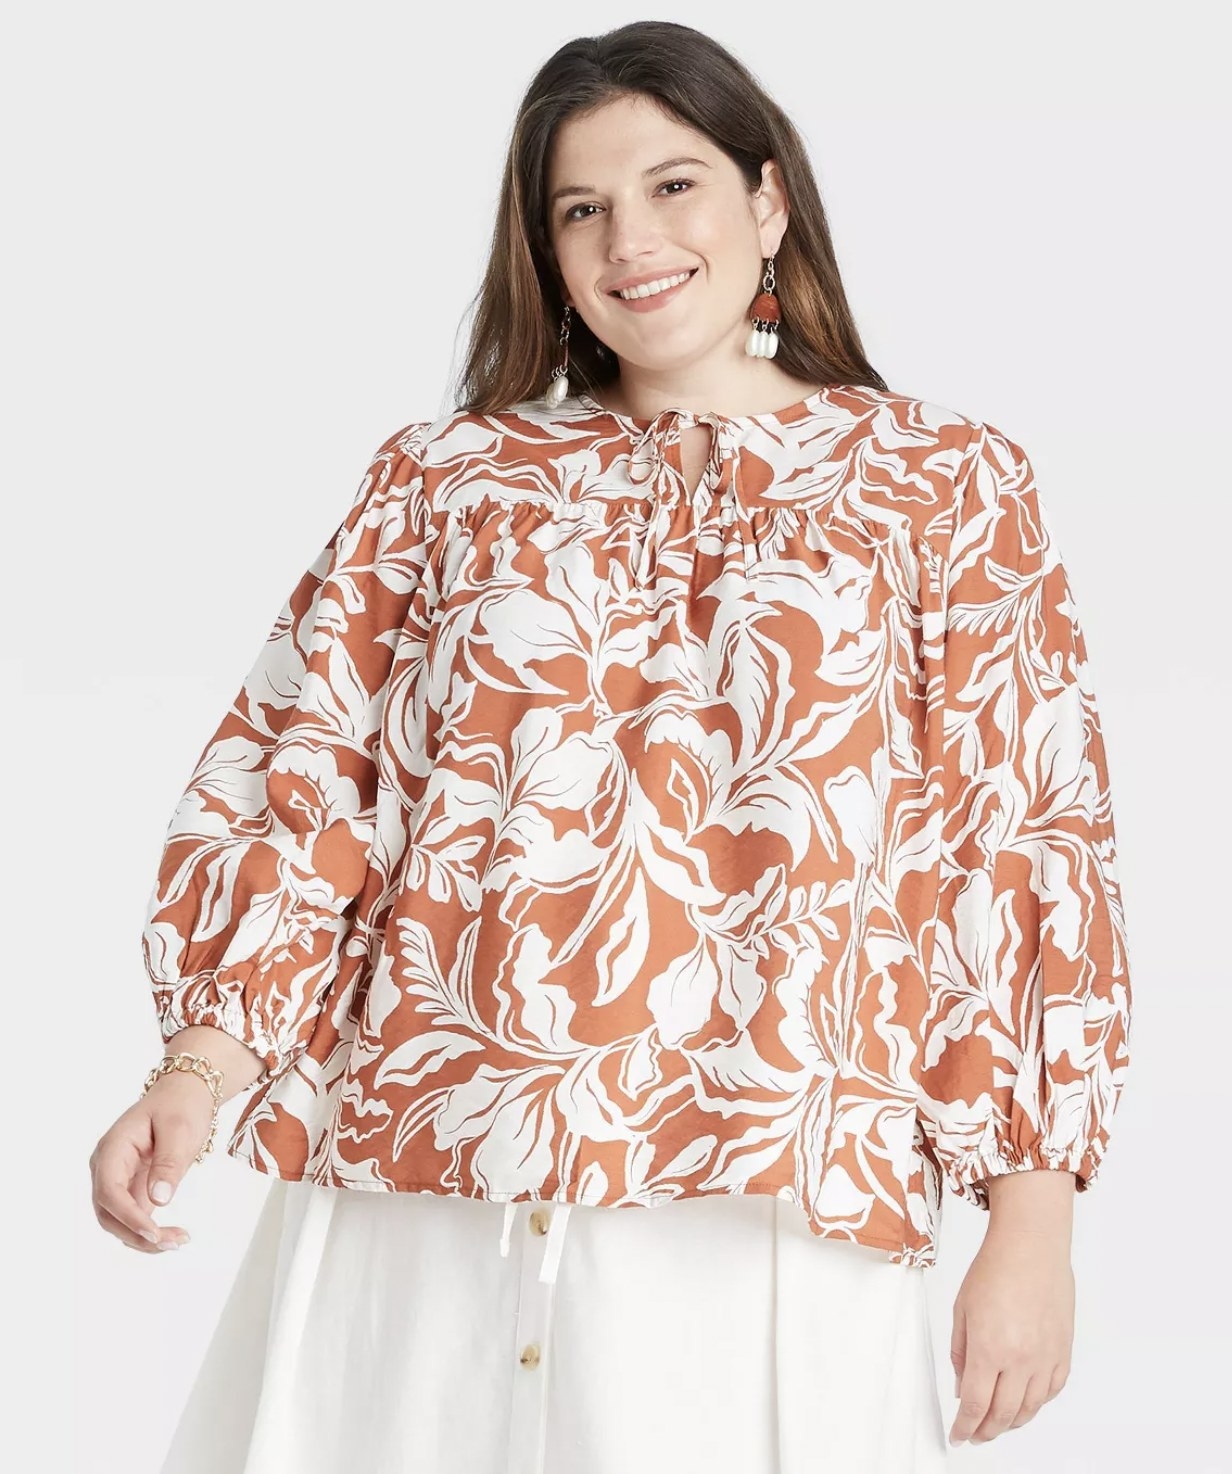 model wearing the blouse in a orange and white floral design